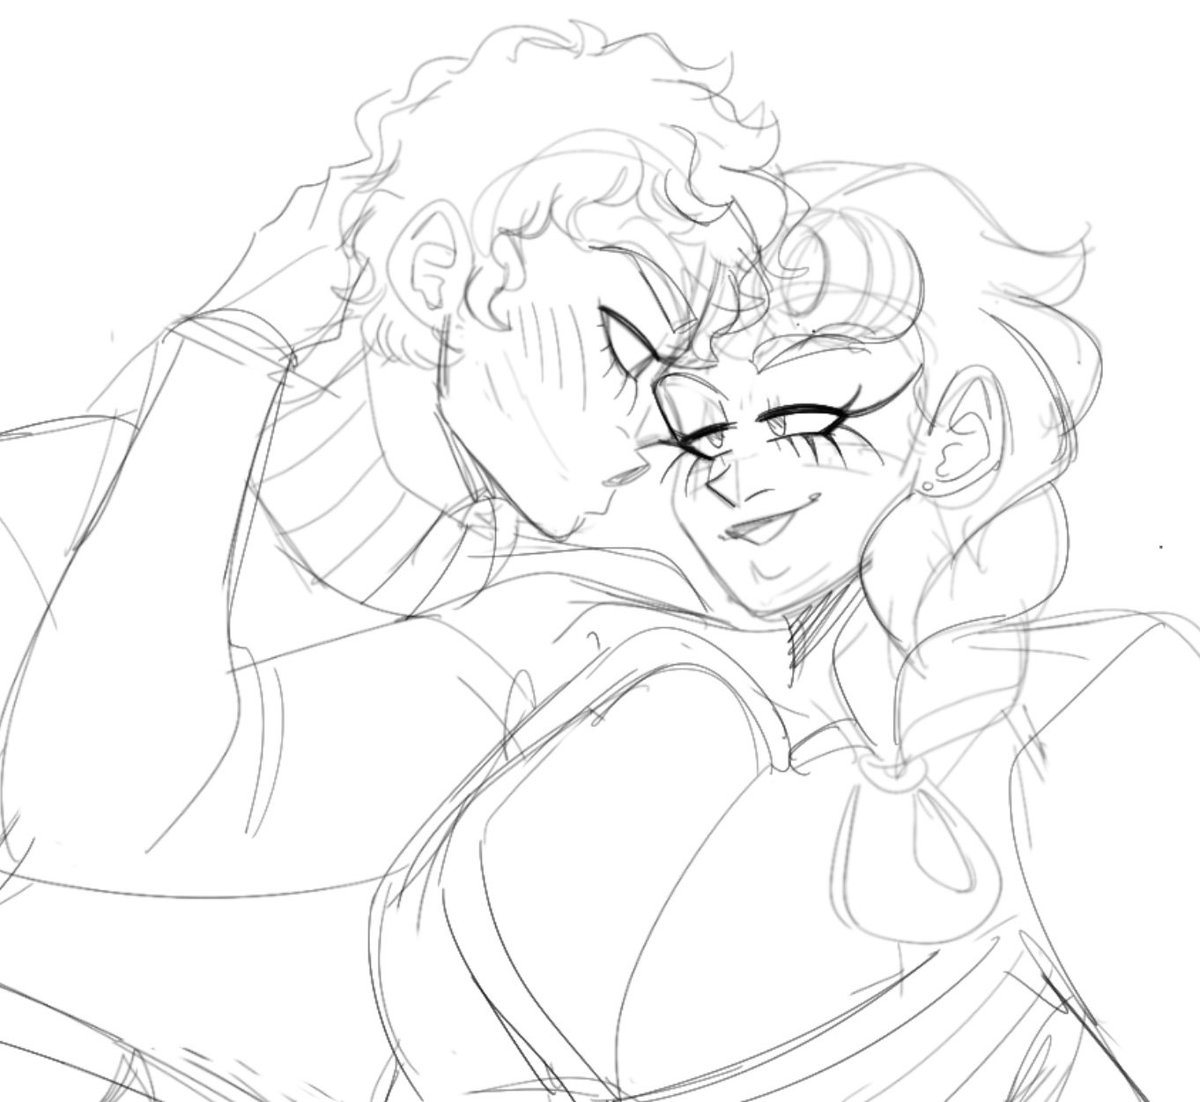 Halfway done with part 5 giorno's a gem to sketch 